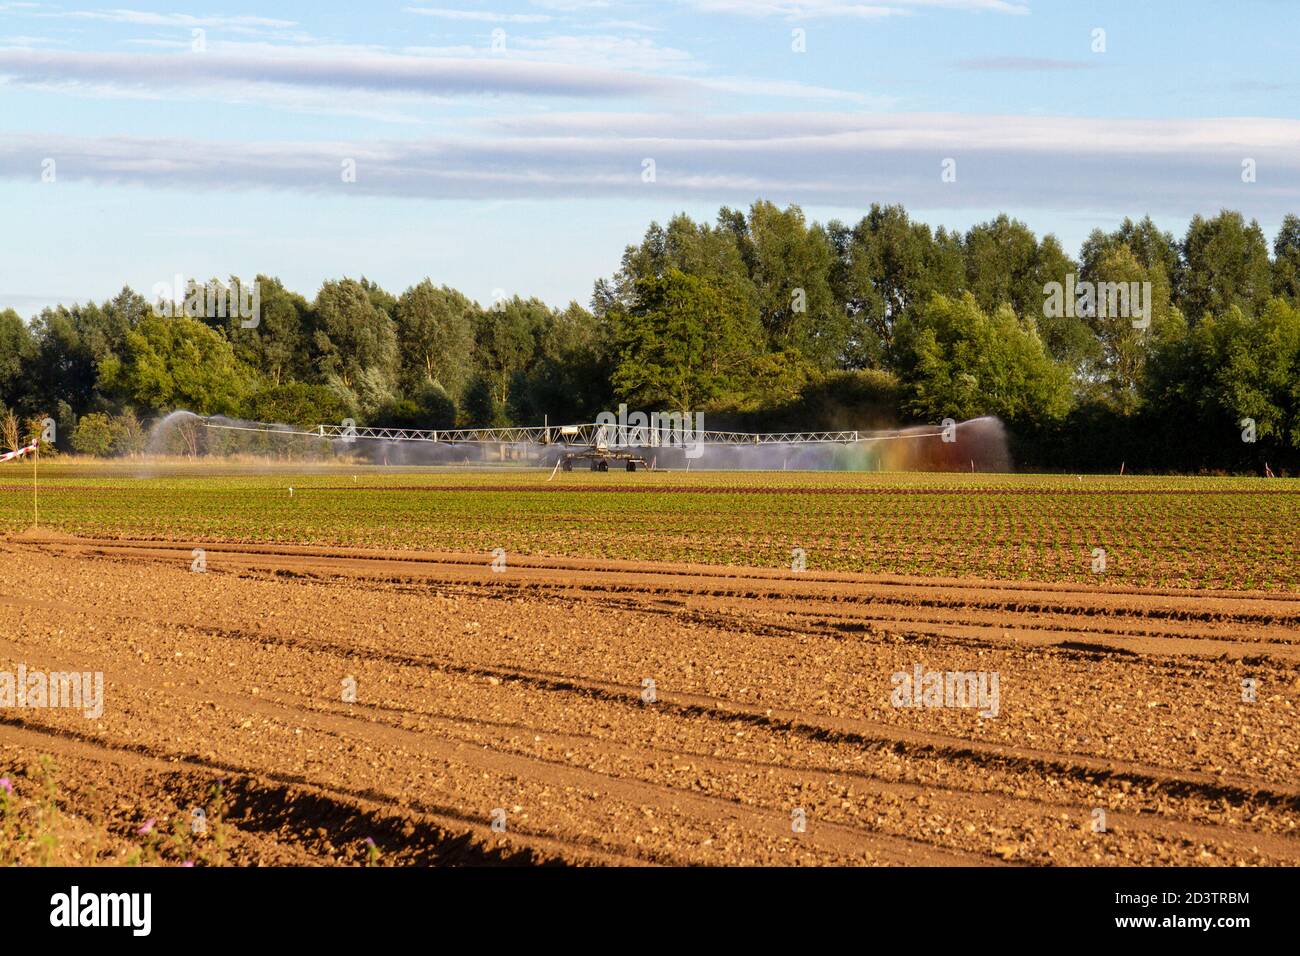 A mobile sprinkler irrigation system in action (and creating a rainbow) on a field in England. Stock Photo